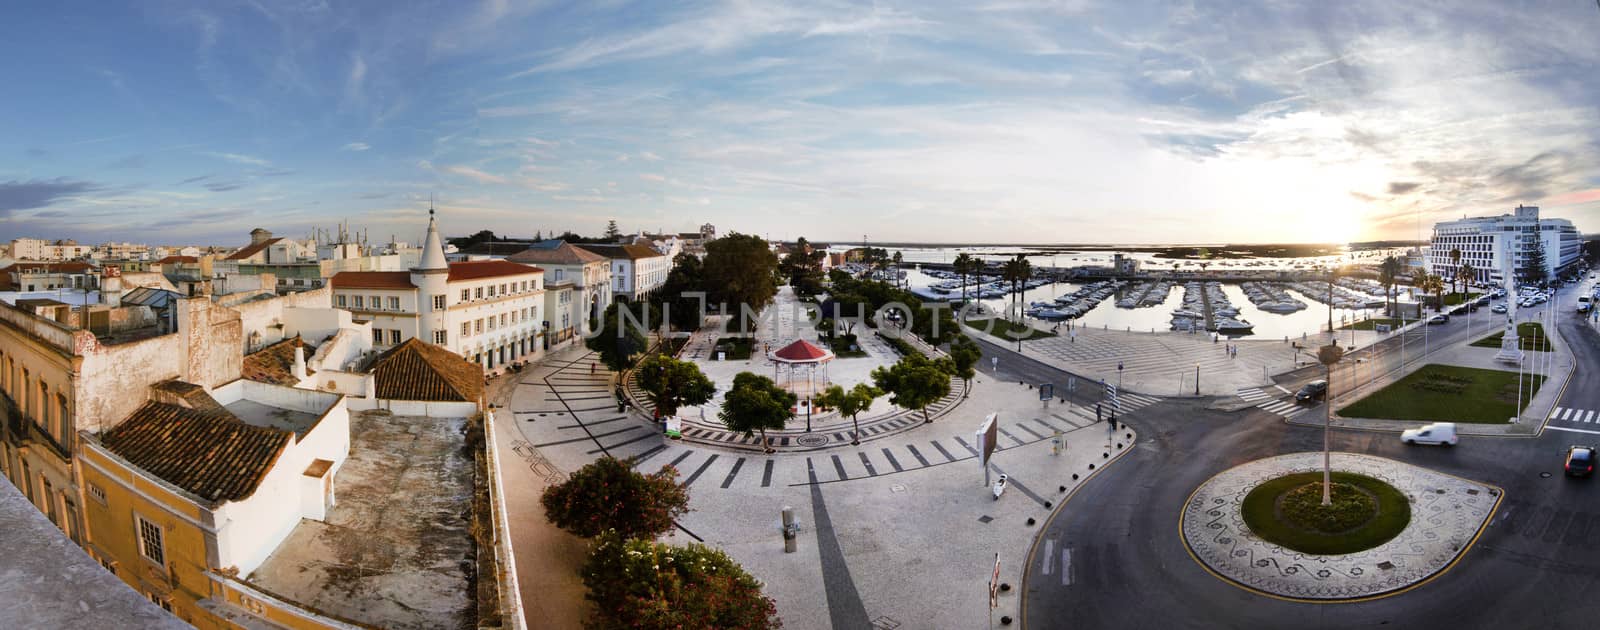 wide view of downtown Faro, Portugal by membio